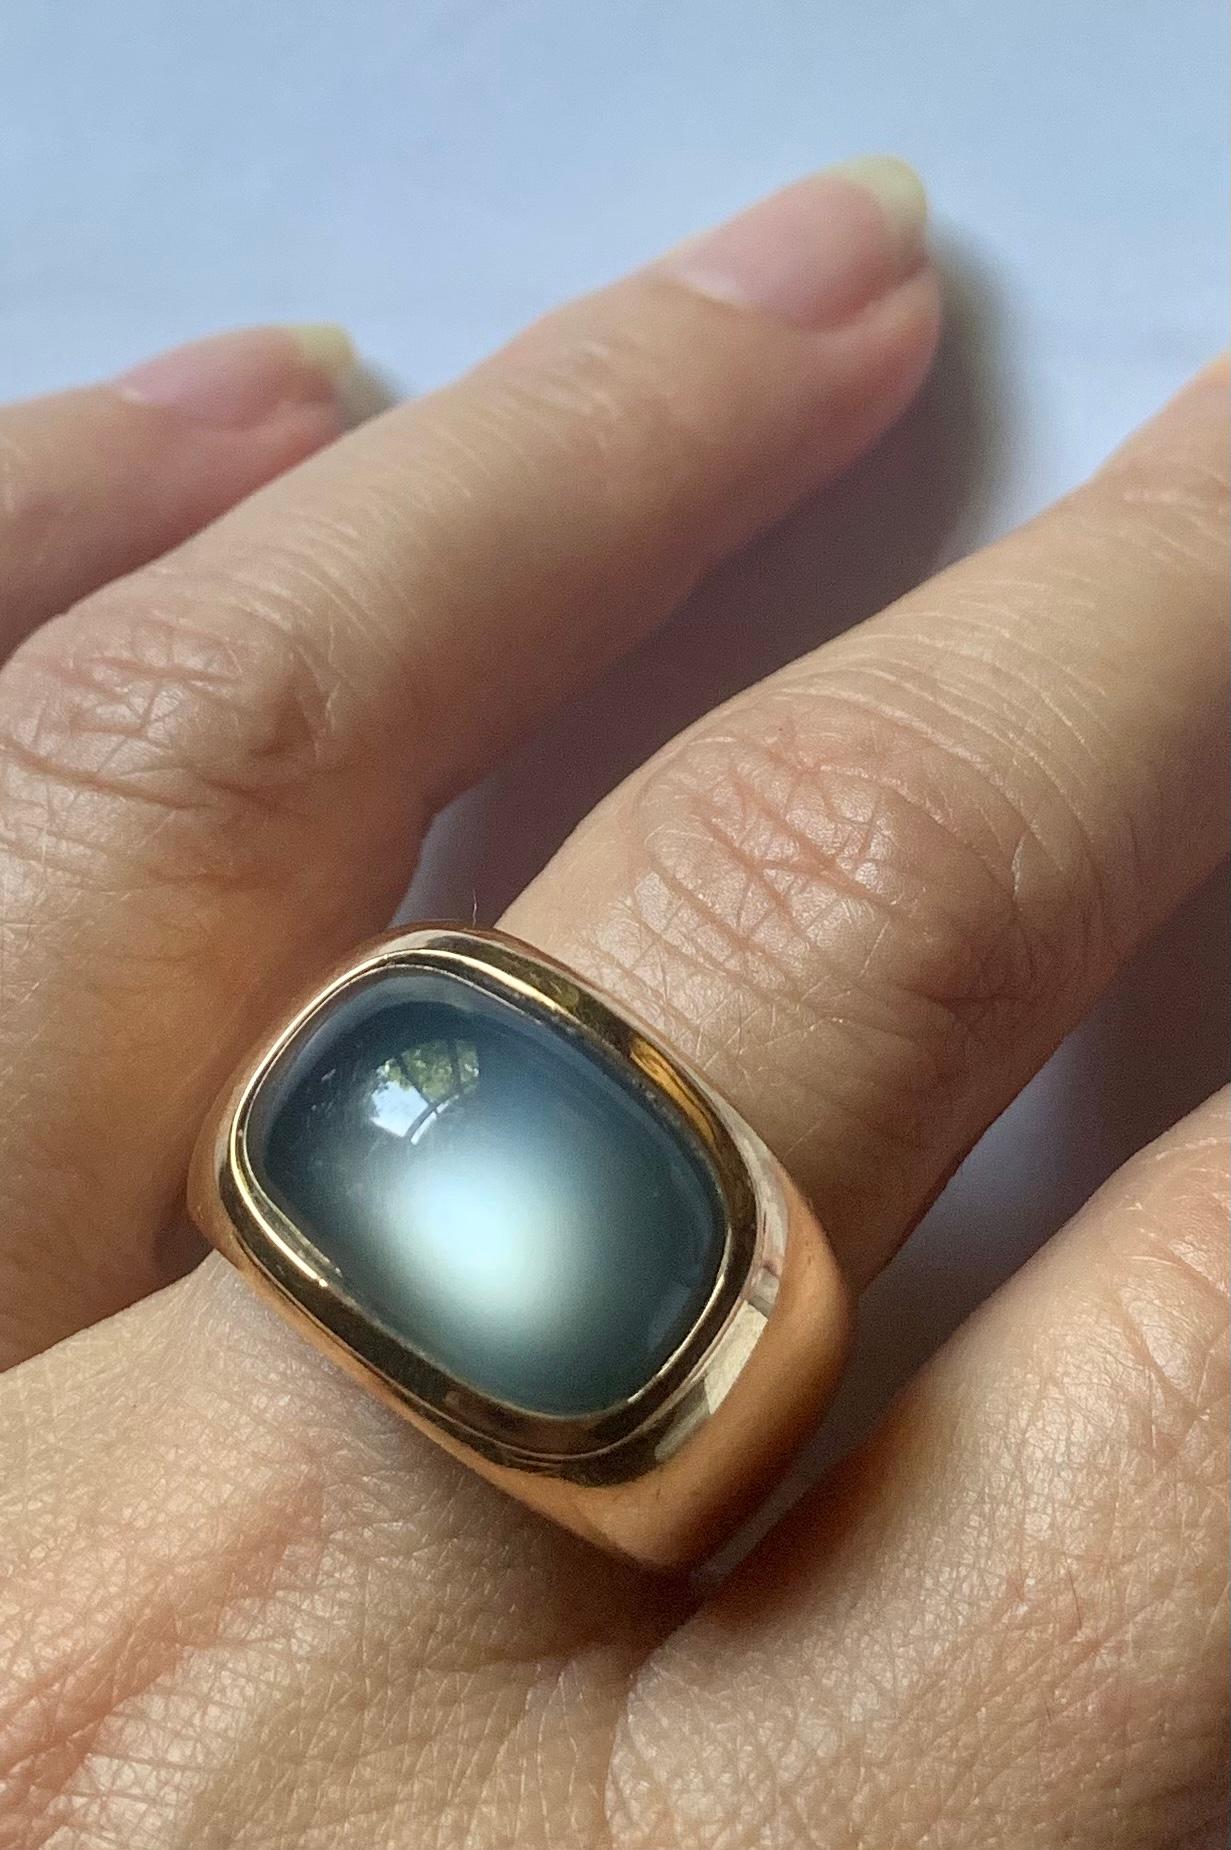 Organic fluidity is aptly descriptive of this elegant estate Vhernier 18K gold and large cabochon moonstone ring. The mysterious silvery grey moonstone pairs perfectly with the substantial, well rounded gold setting which fits seamlessly on the